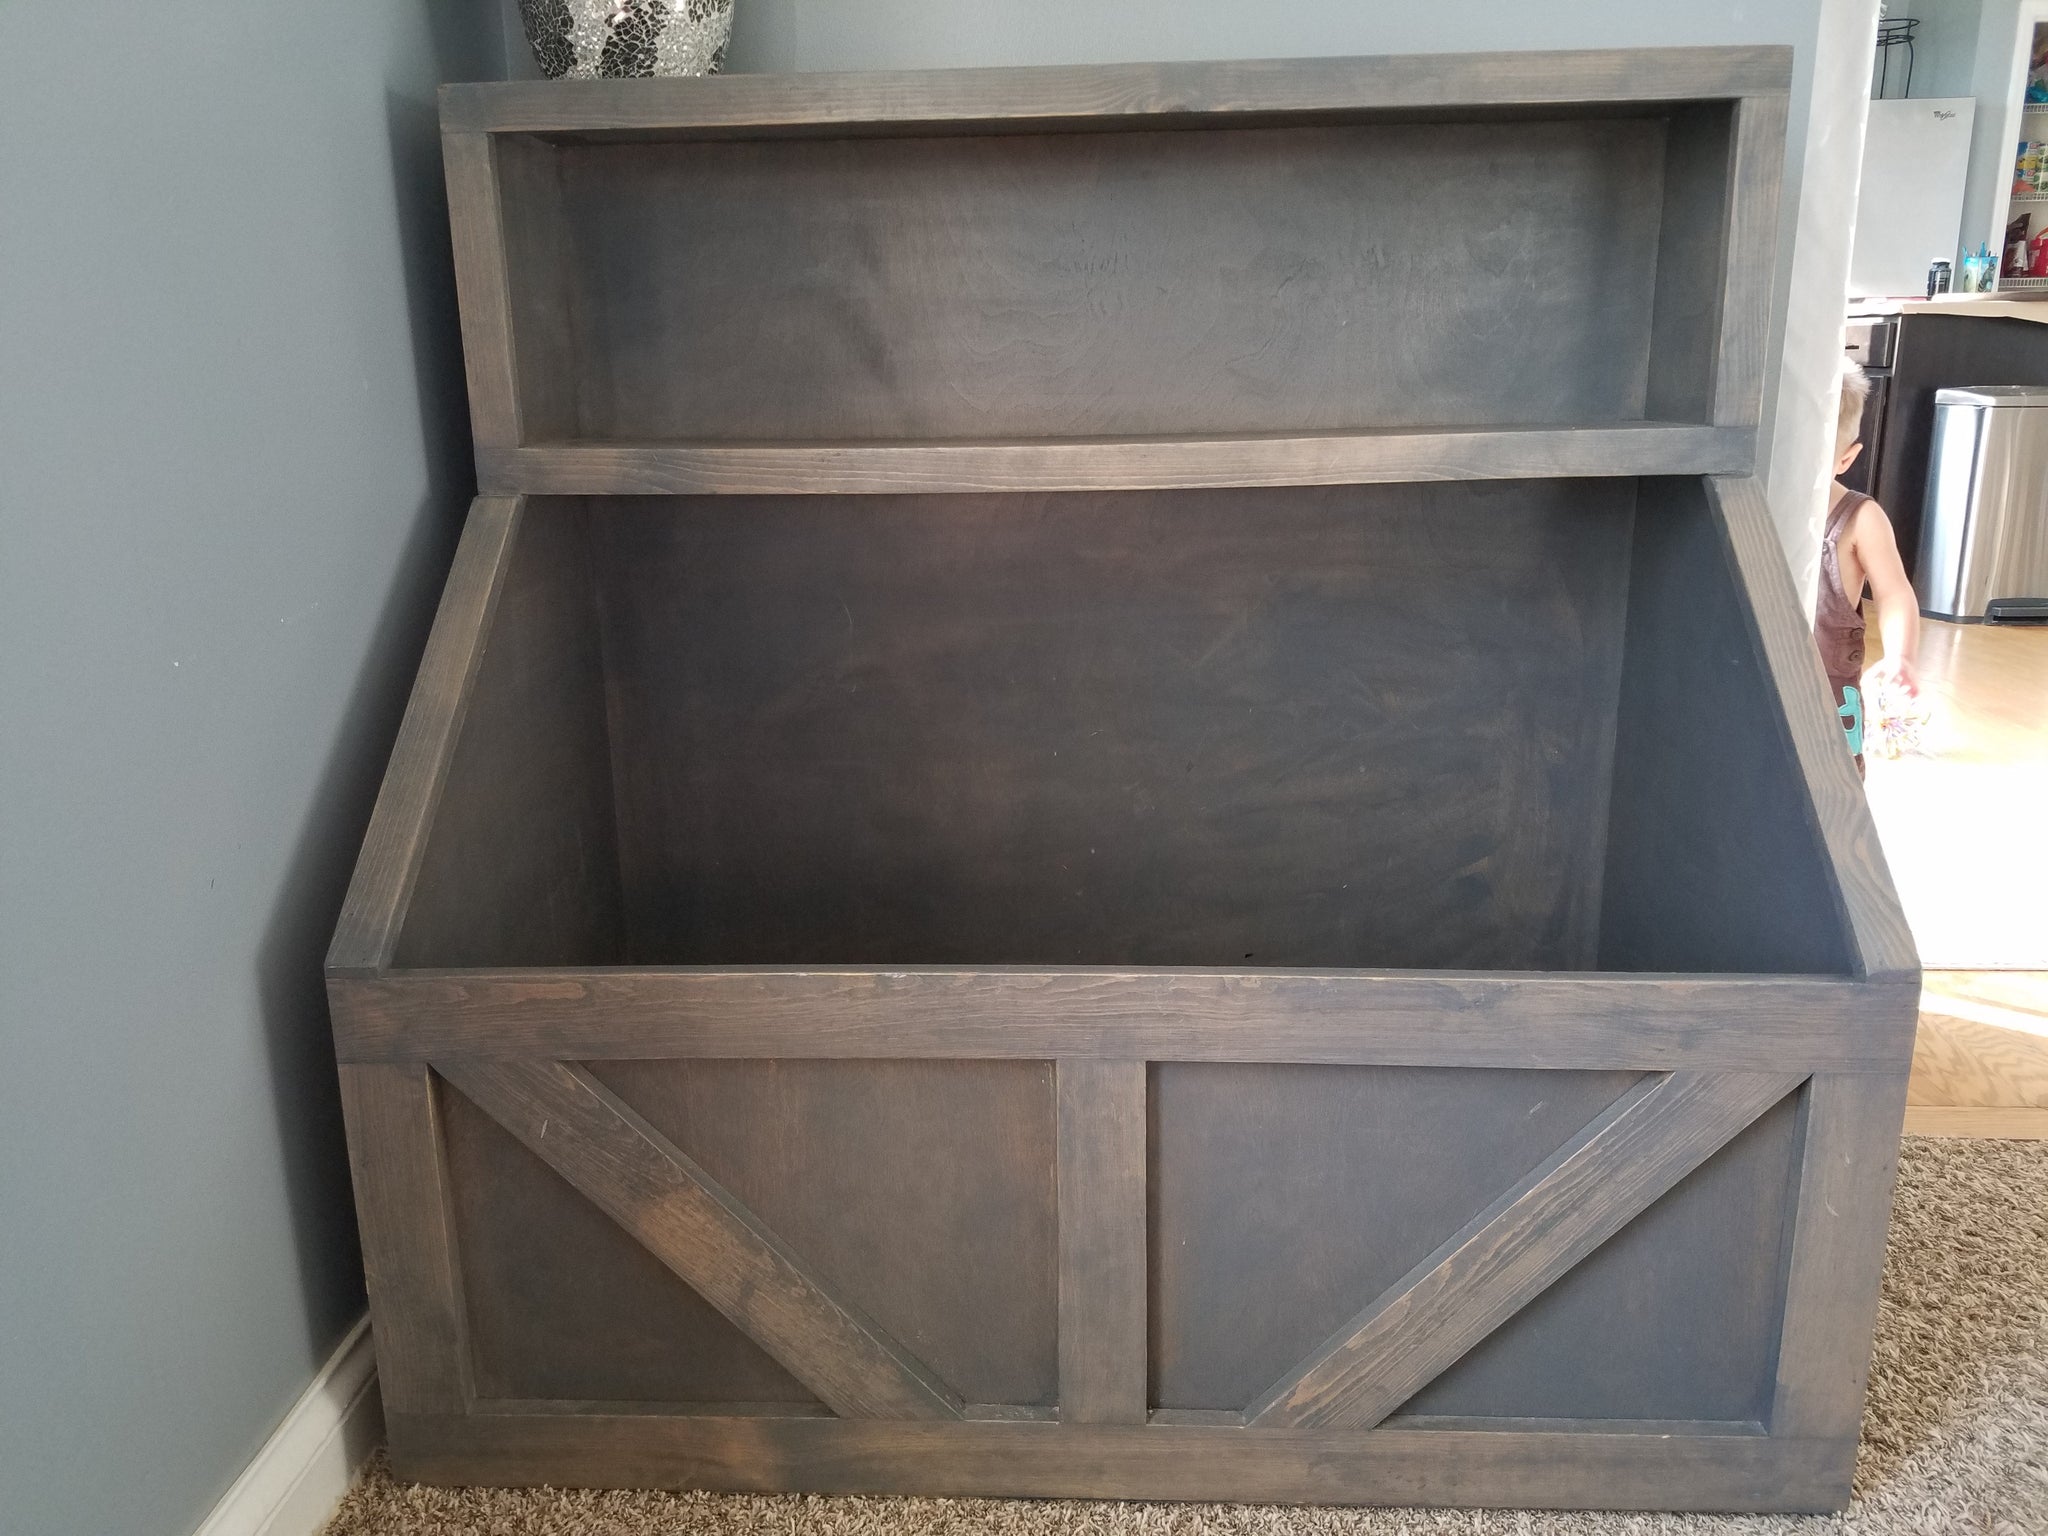 gray wooden toy box